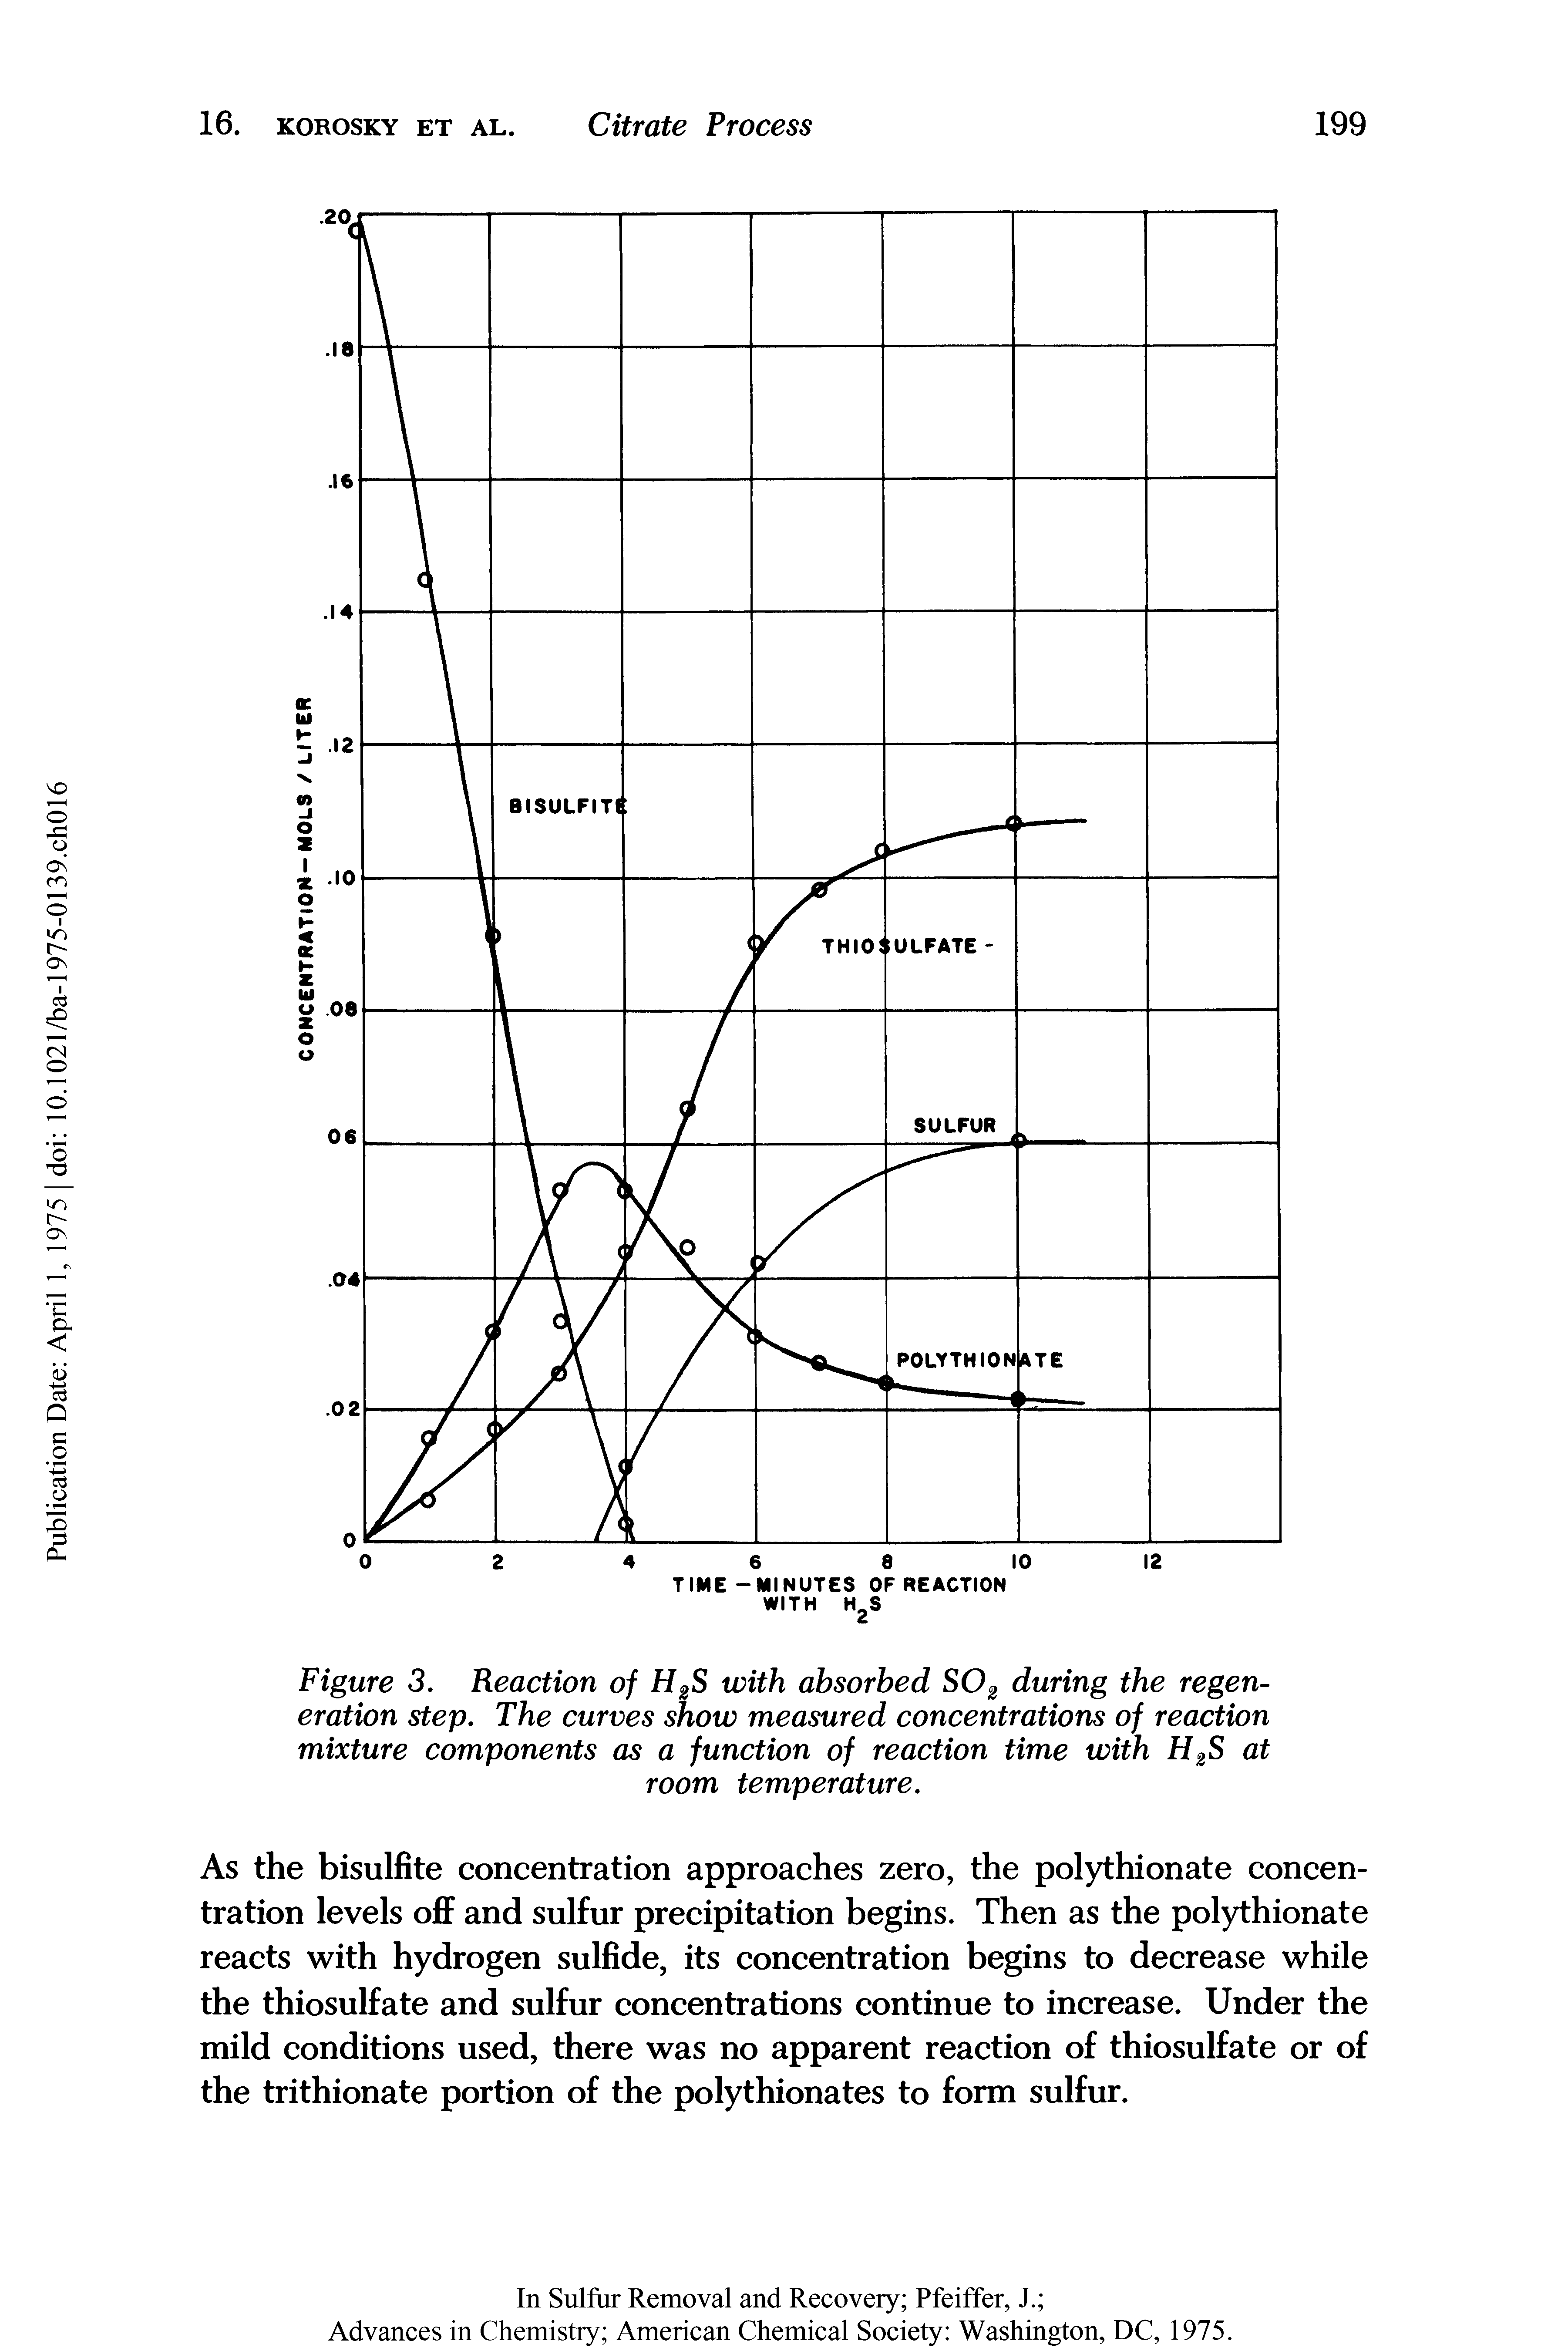 Figure 3. Reaction of H2S with absorbed S02 during the regeneration step. The curves show measured concentrations of reaction mixture components as a function of reaction time with H2S at room temperature.